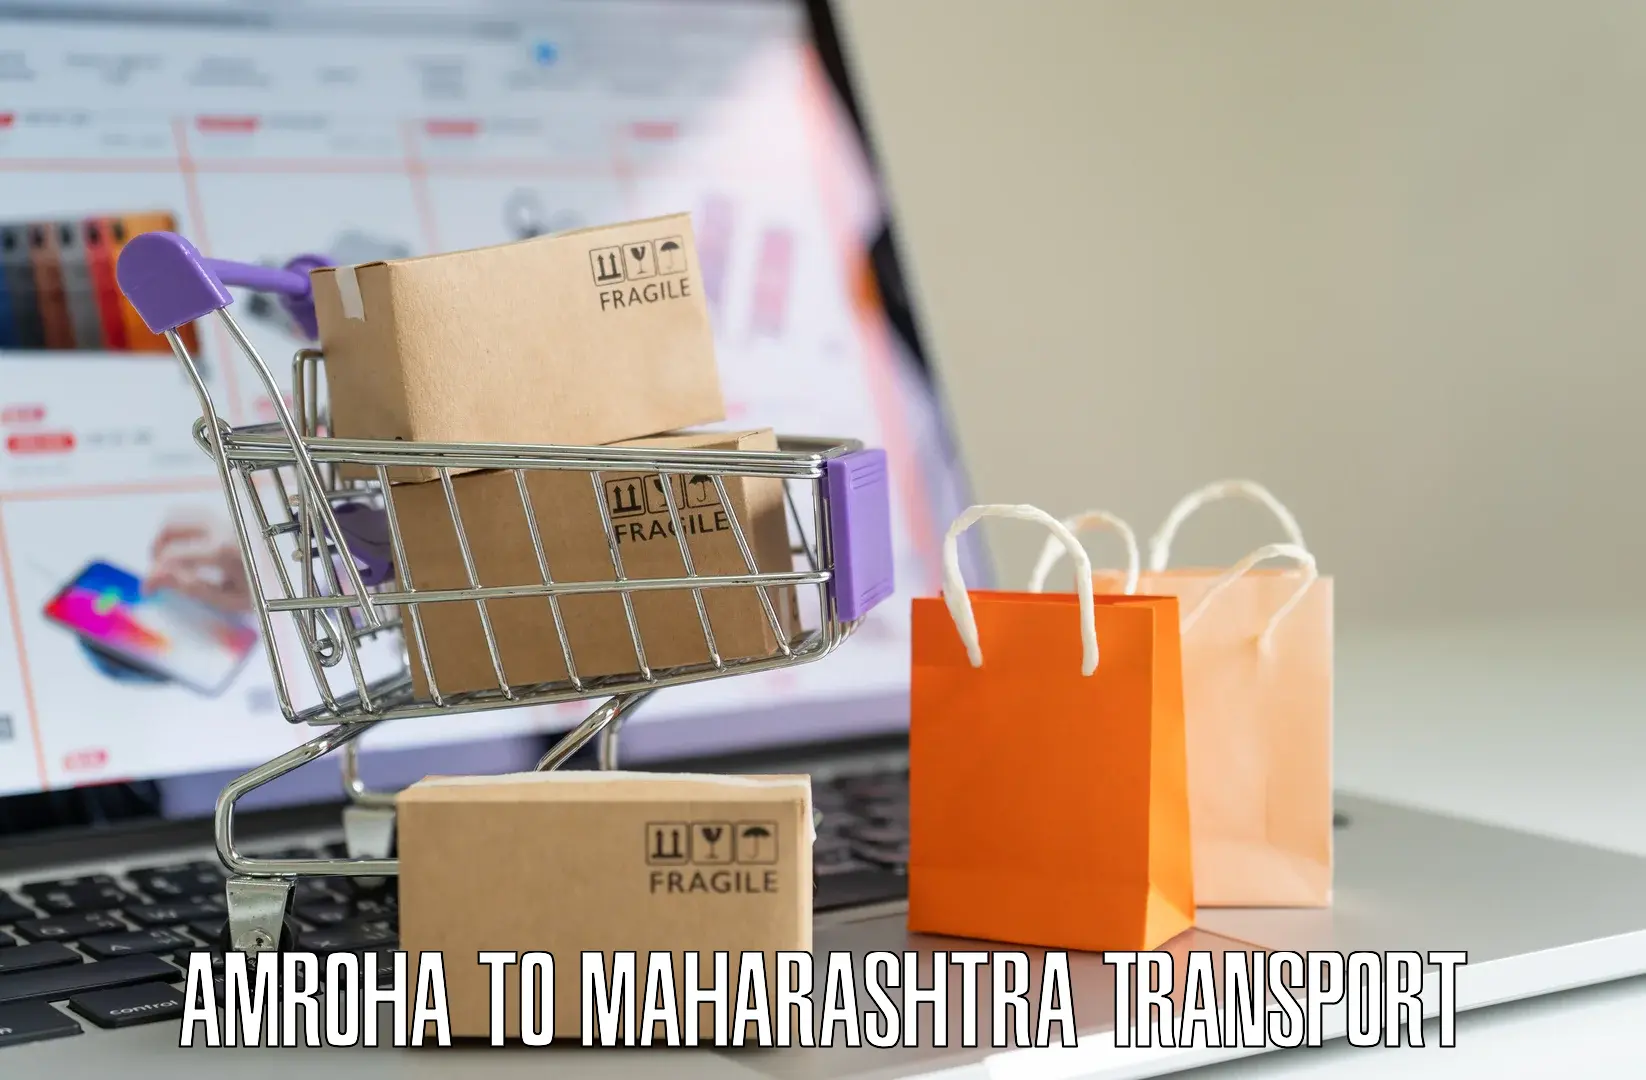 Goods delivery service Amroha to Worli